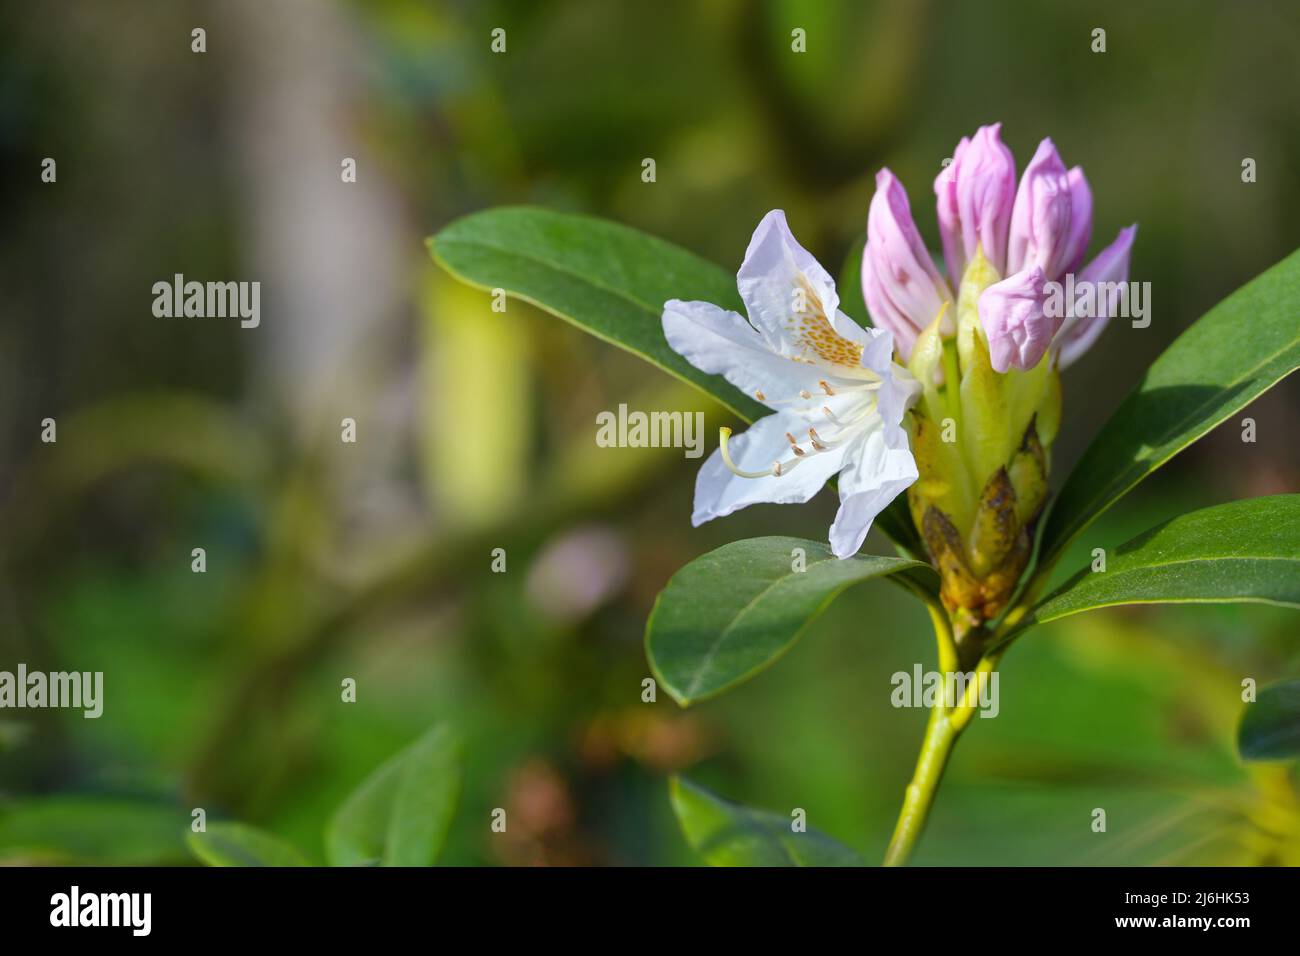 Blooming azalea shrub with a white flower and a pink bud in spring, genus Rhododendron, blooming natural green background, copy space, selected focus, Stock Photo